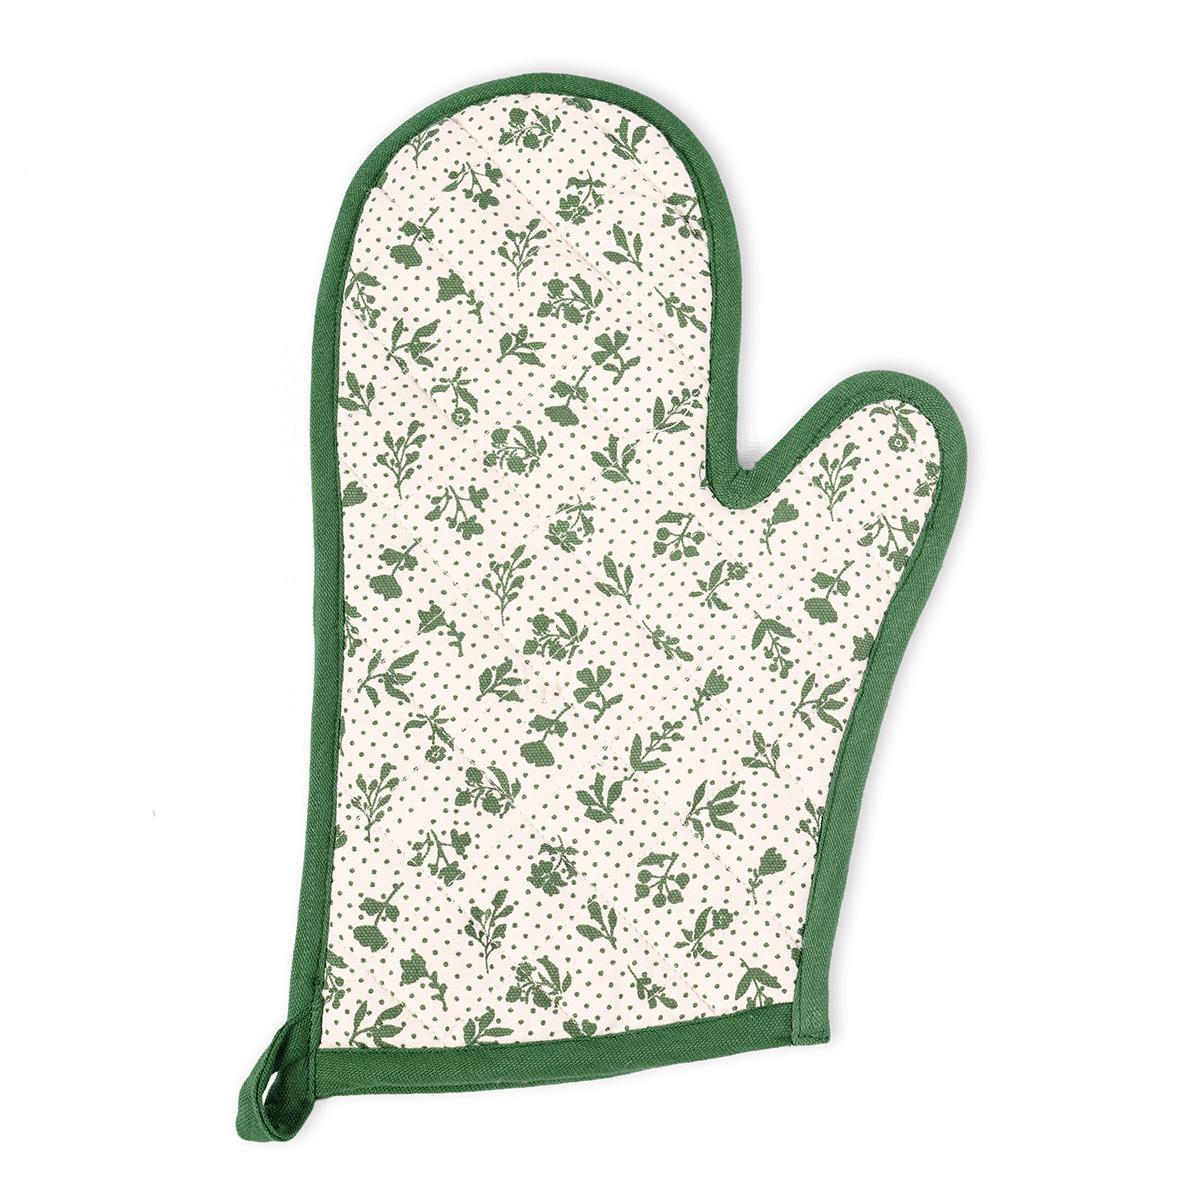 DOMINOTERIE Green floral print Pot holder and Glove, kitchen accessory, 100% cotton, view options